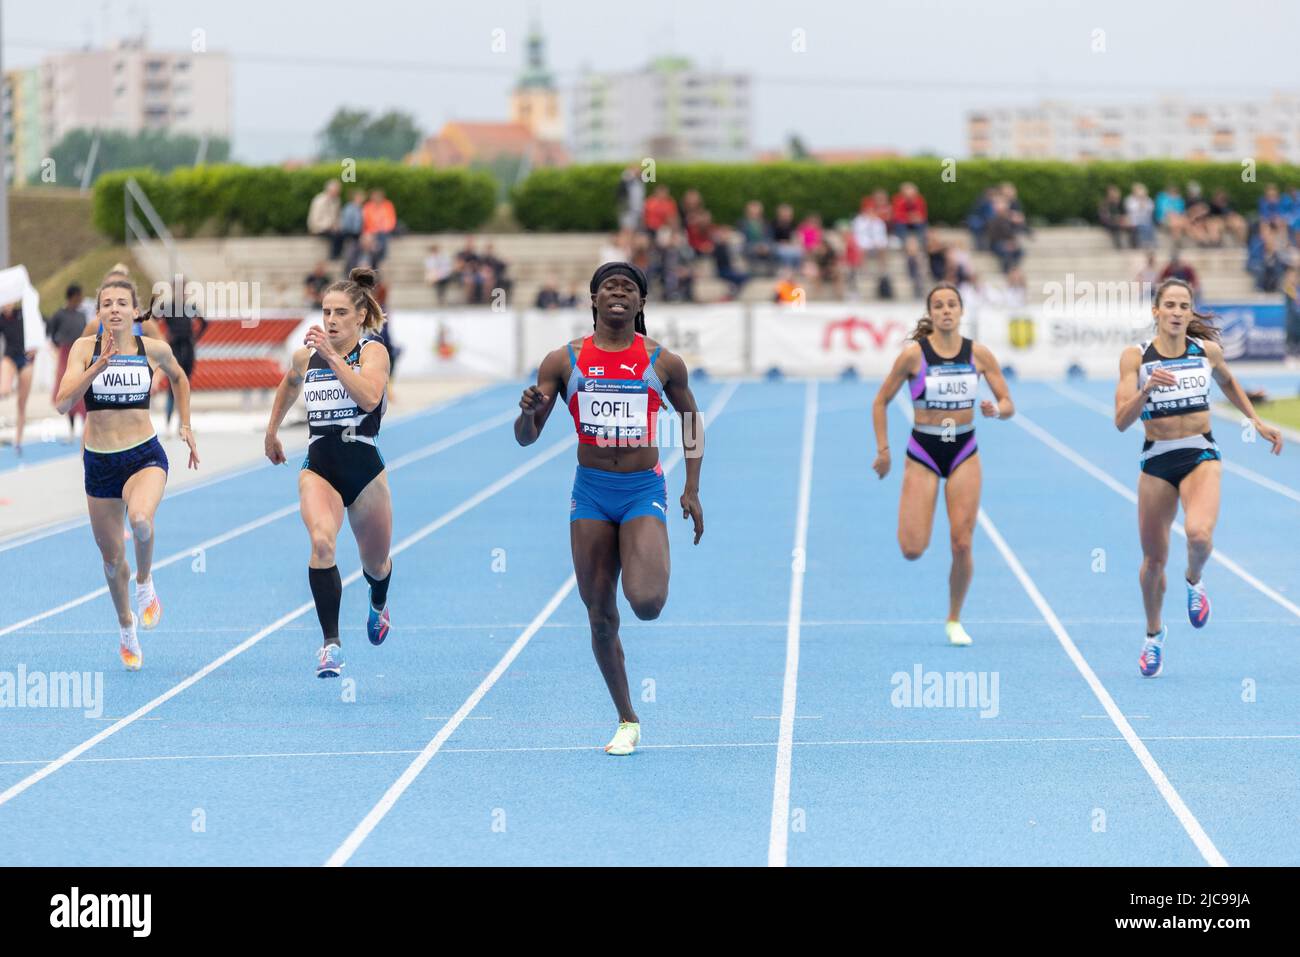 Women´s 400 metre at the P-T-S athletics meeting in the sports site of x-bionic sphere® in Šamorín, Slovakia, 9. June 2022 Stock Photo